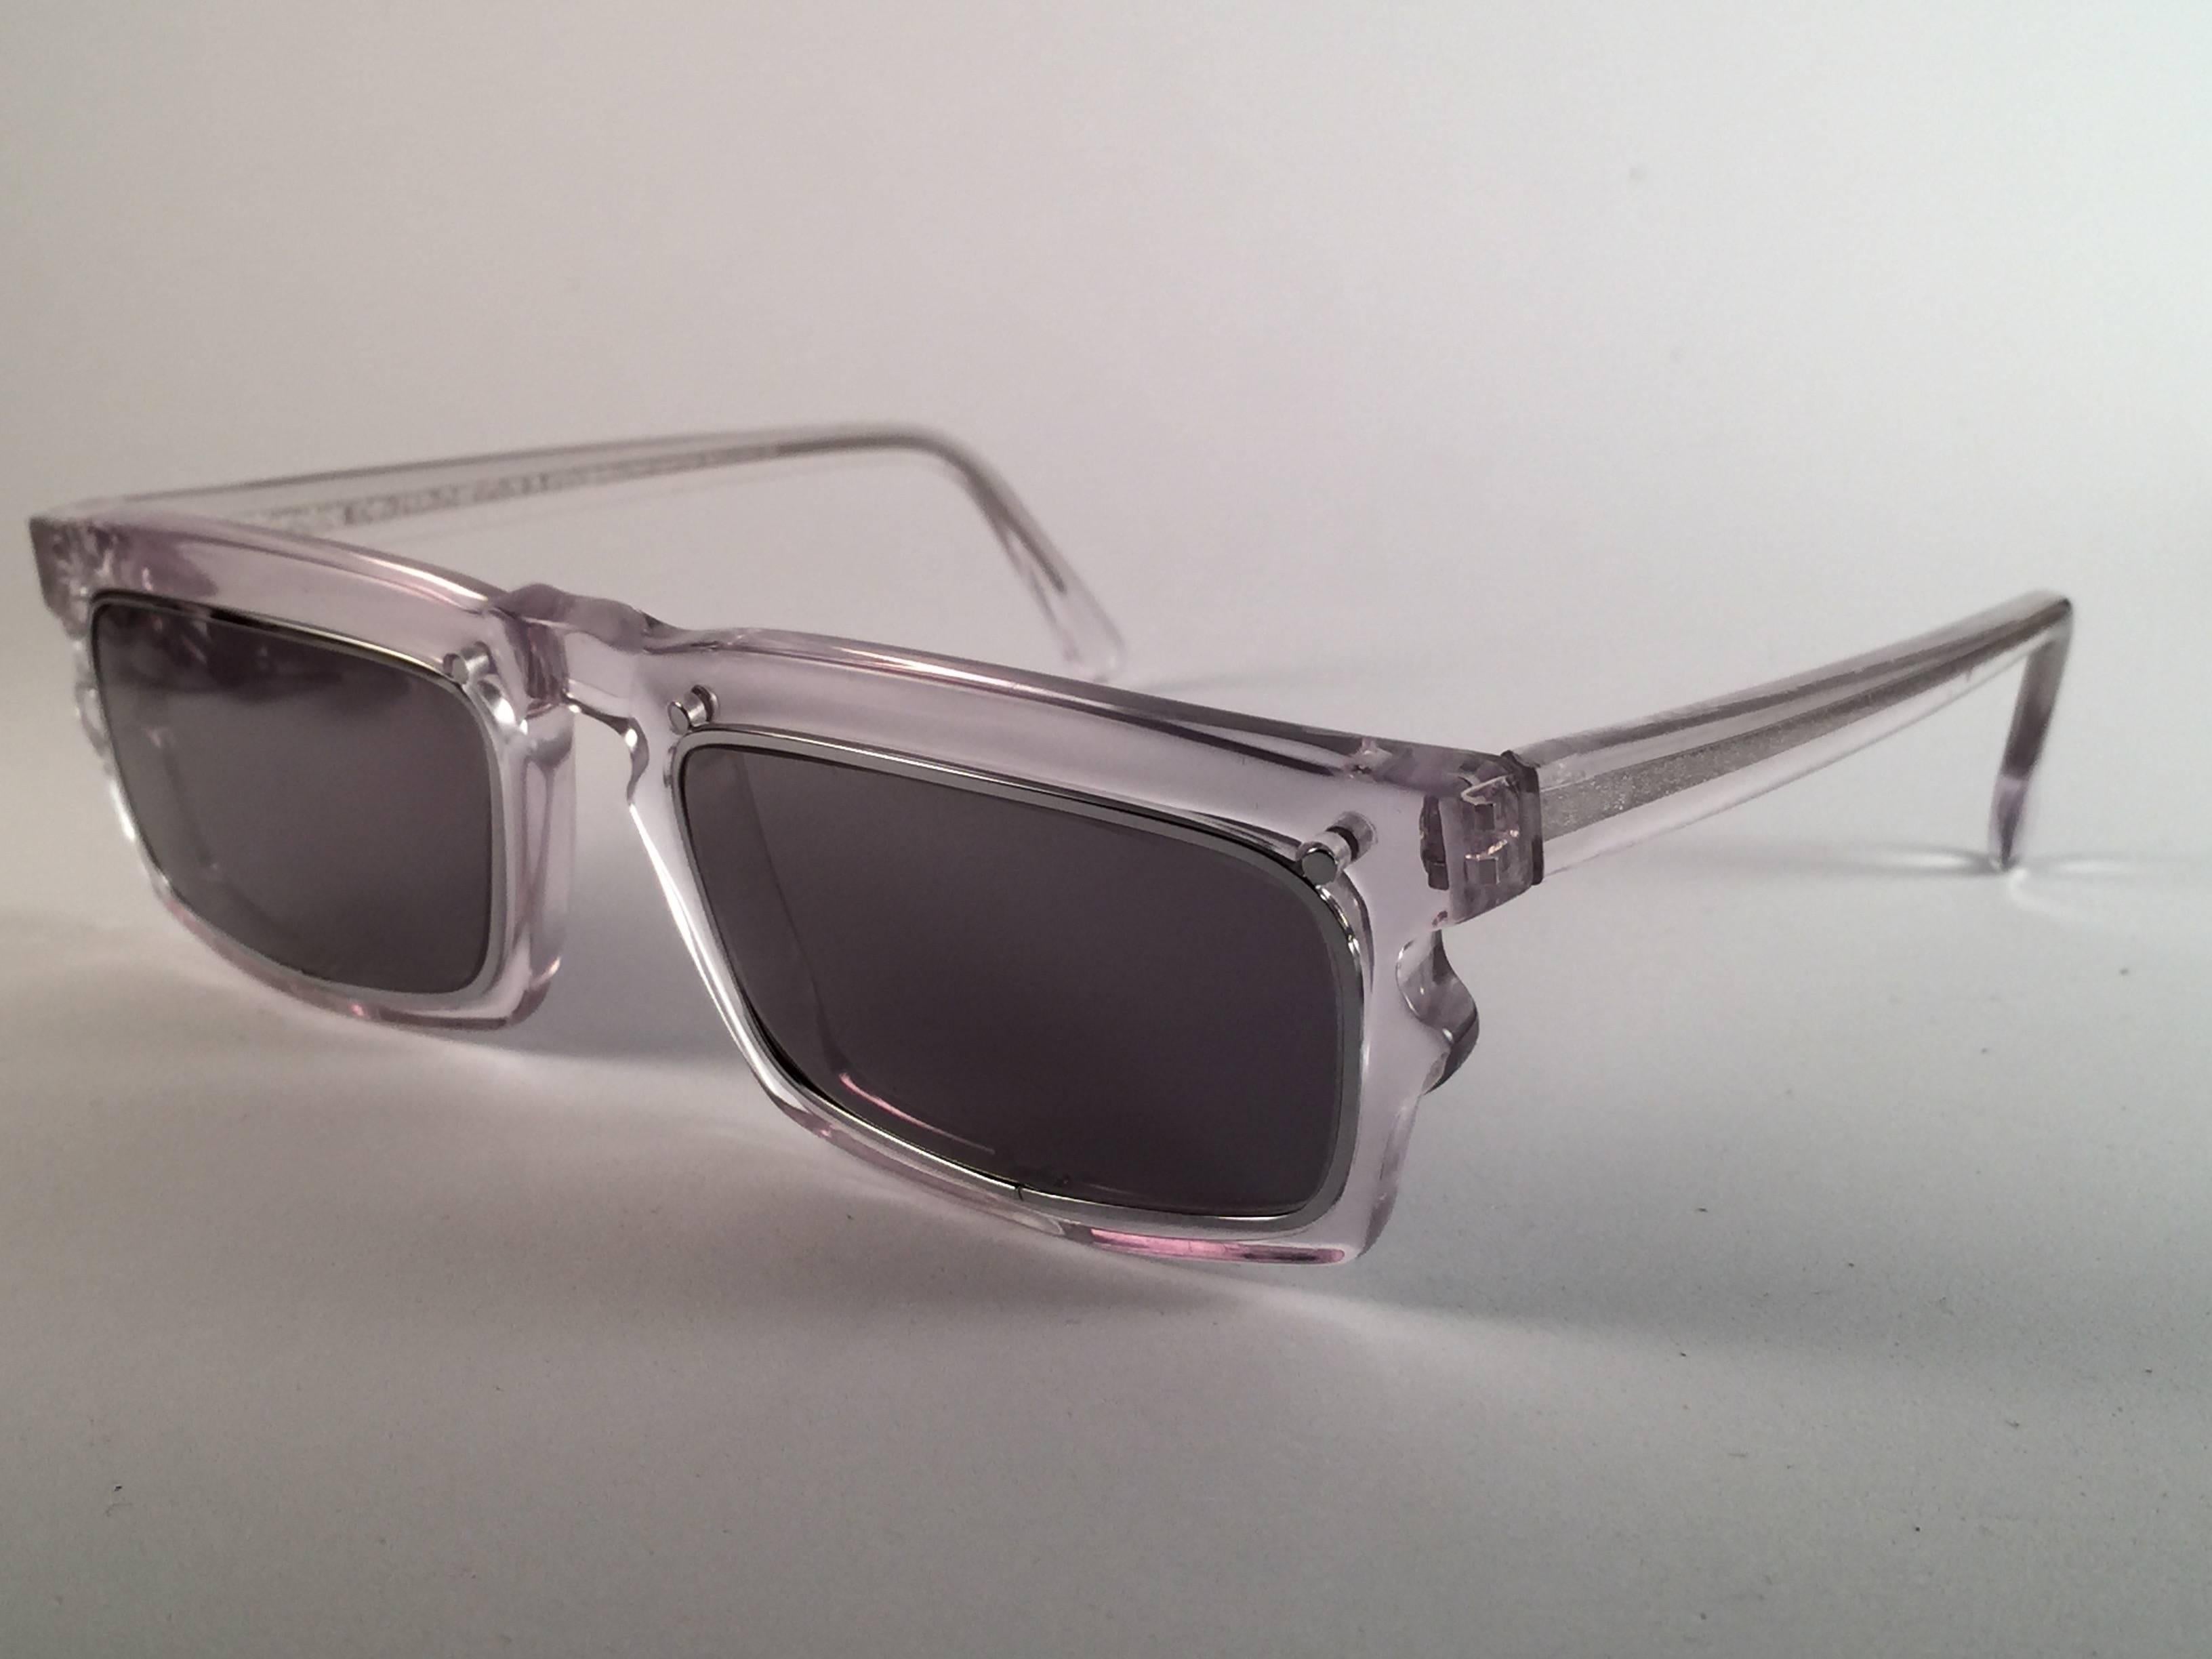 New vintage IDC 767, rectangular clear frame holding pair of spotless mirror lenses.  The very same model worn by Anthony Kiedis from Red Hot Chili Peppers. New, never worn or displayed this pair may have minor sign of wear due to storage. Made in